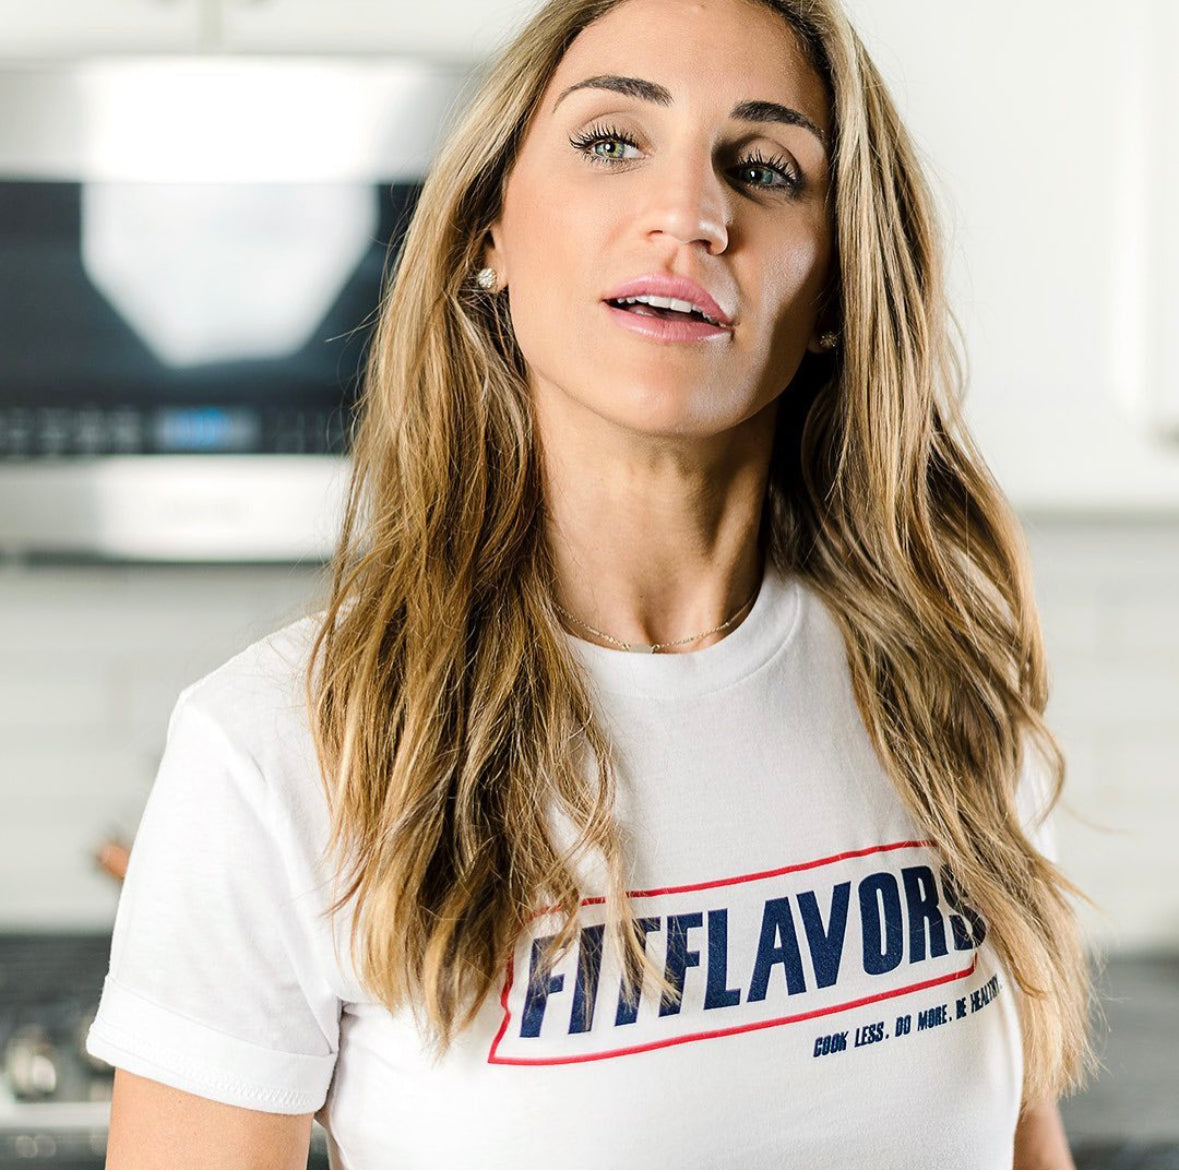 Snicker fit-flavors shirt